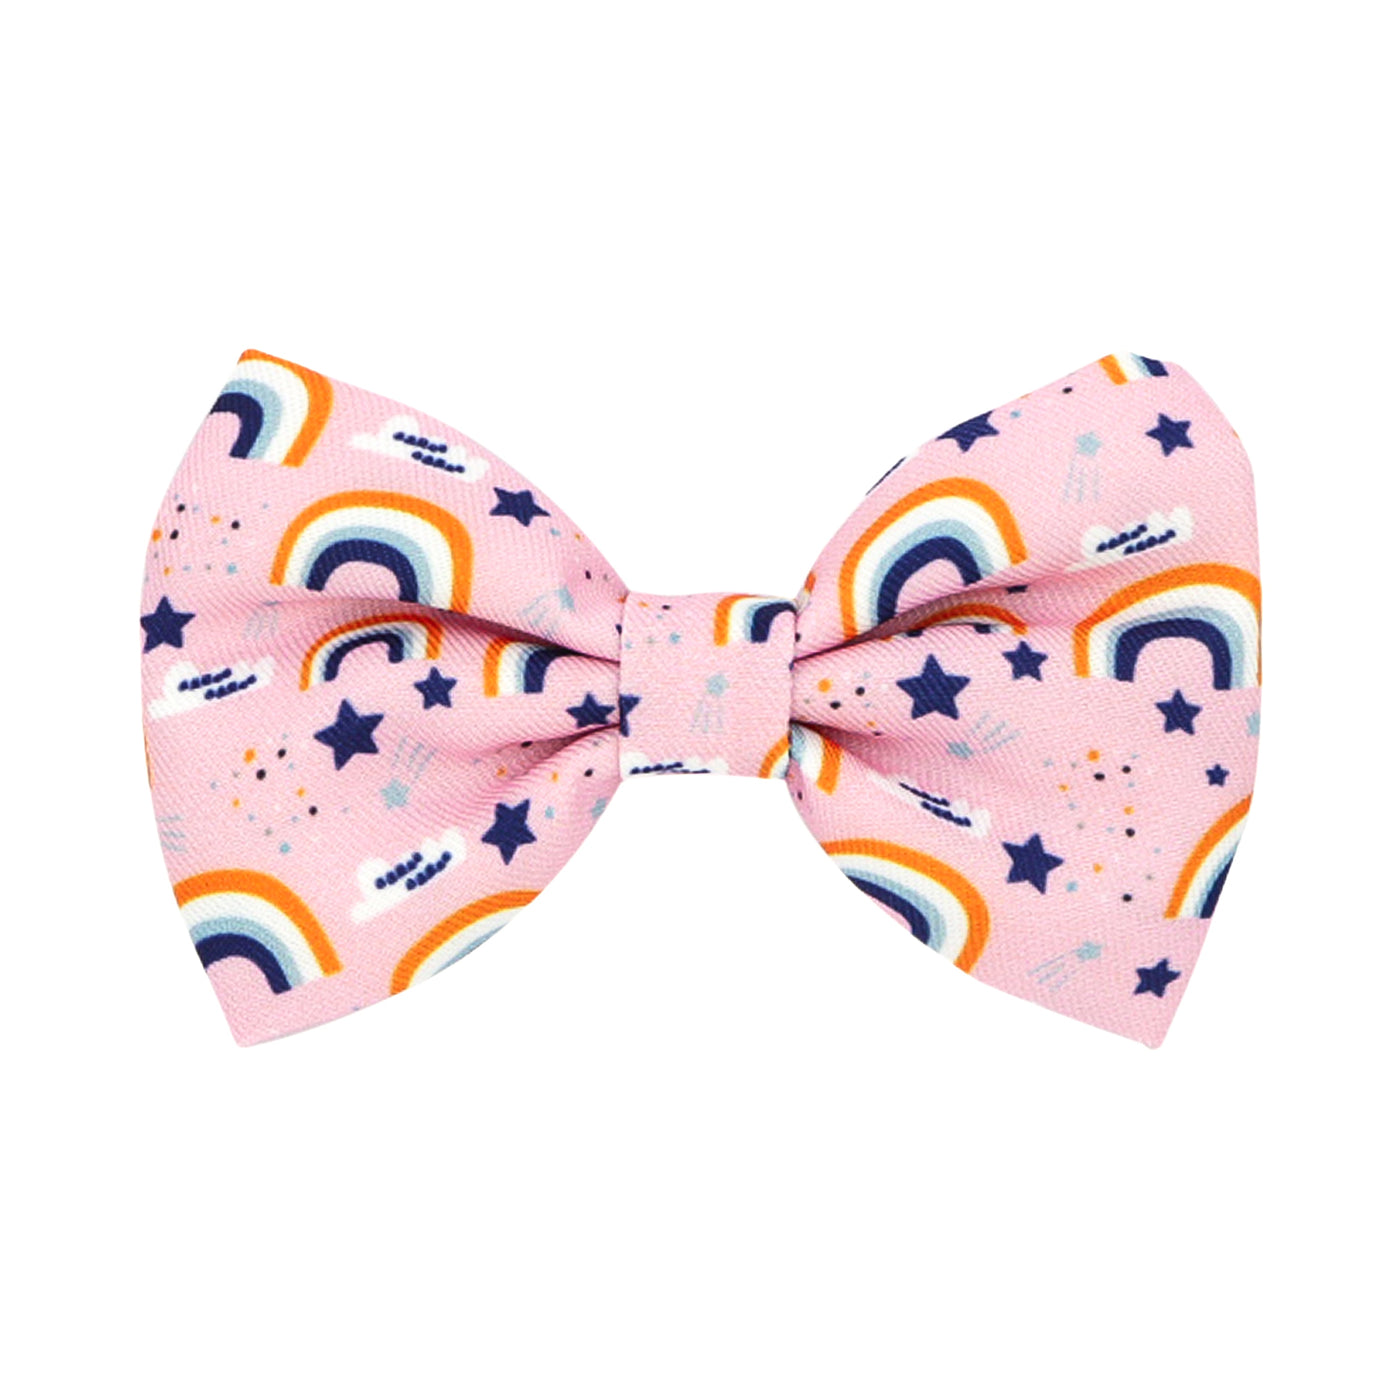 Over The Rainbow - Bow Tie - End Of Line